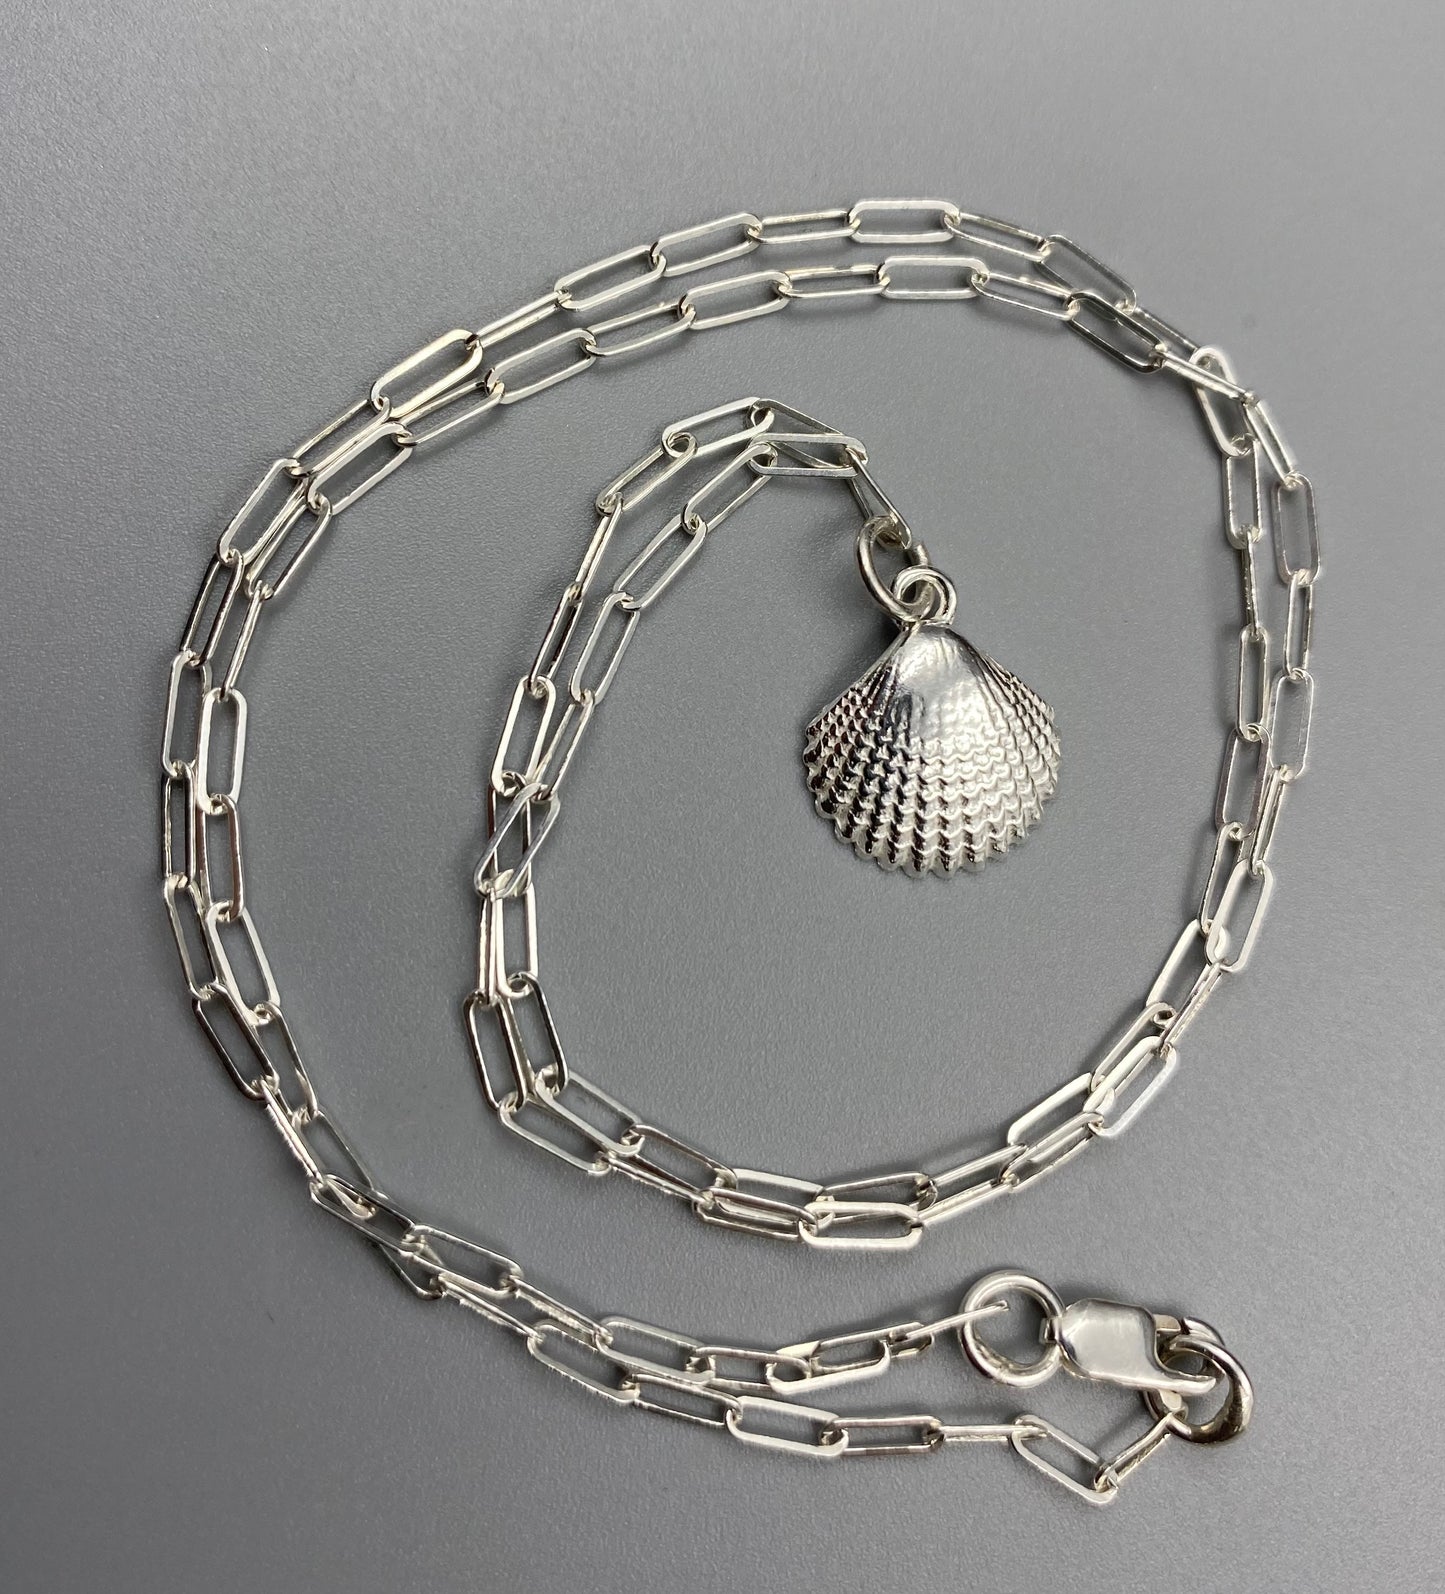 Scallop charm skinny trace chain necklace in Sterling Silver